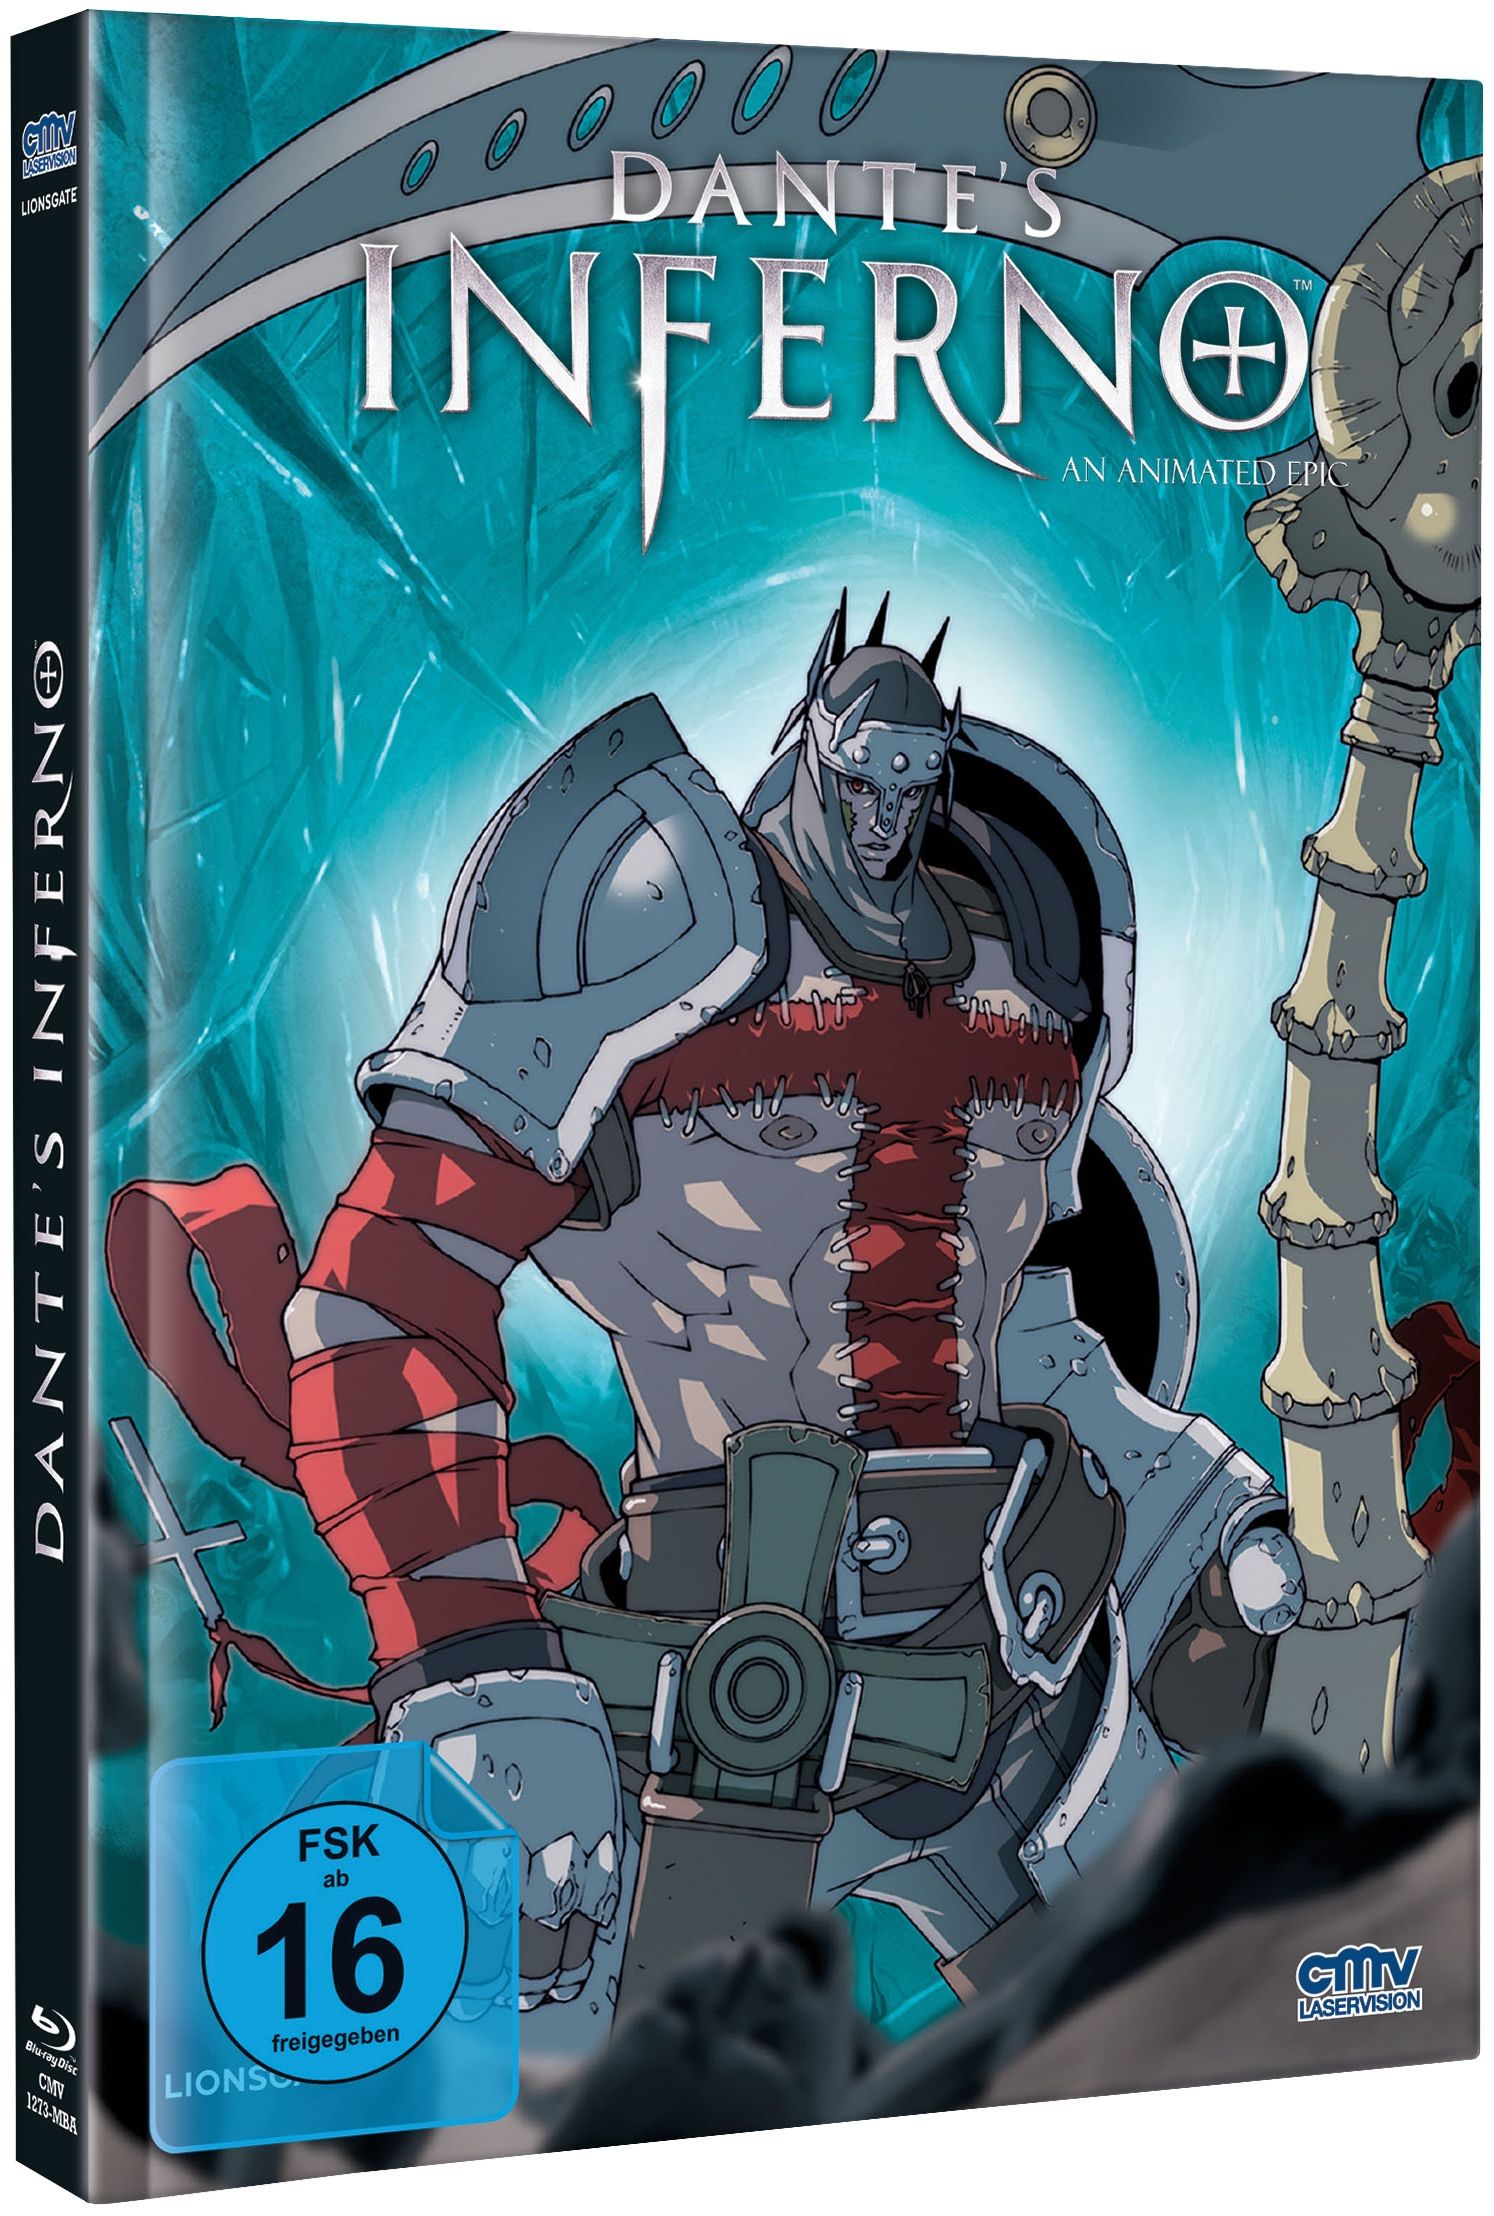 Dante's Inferno - An Animated Epic (Lim. Uncut Mediabook - Cover F) (DVD + BLURAY)